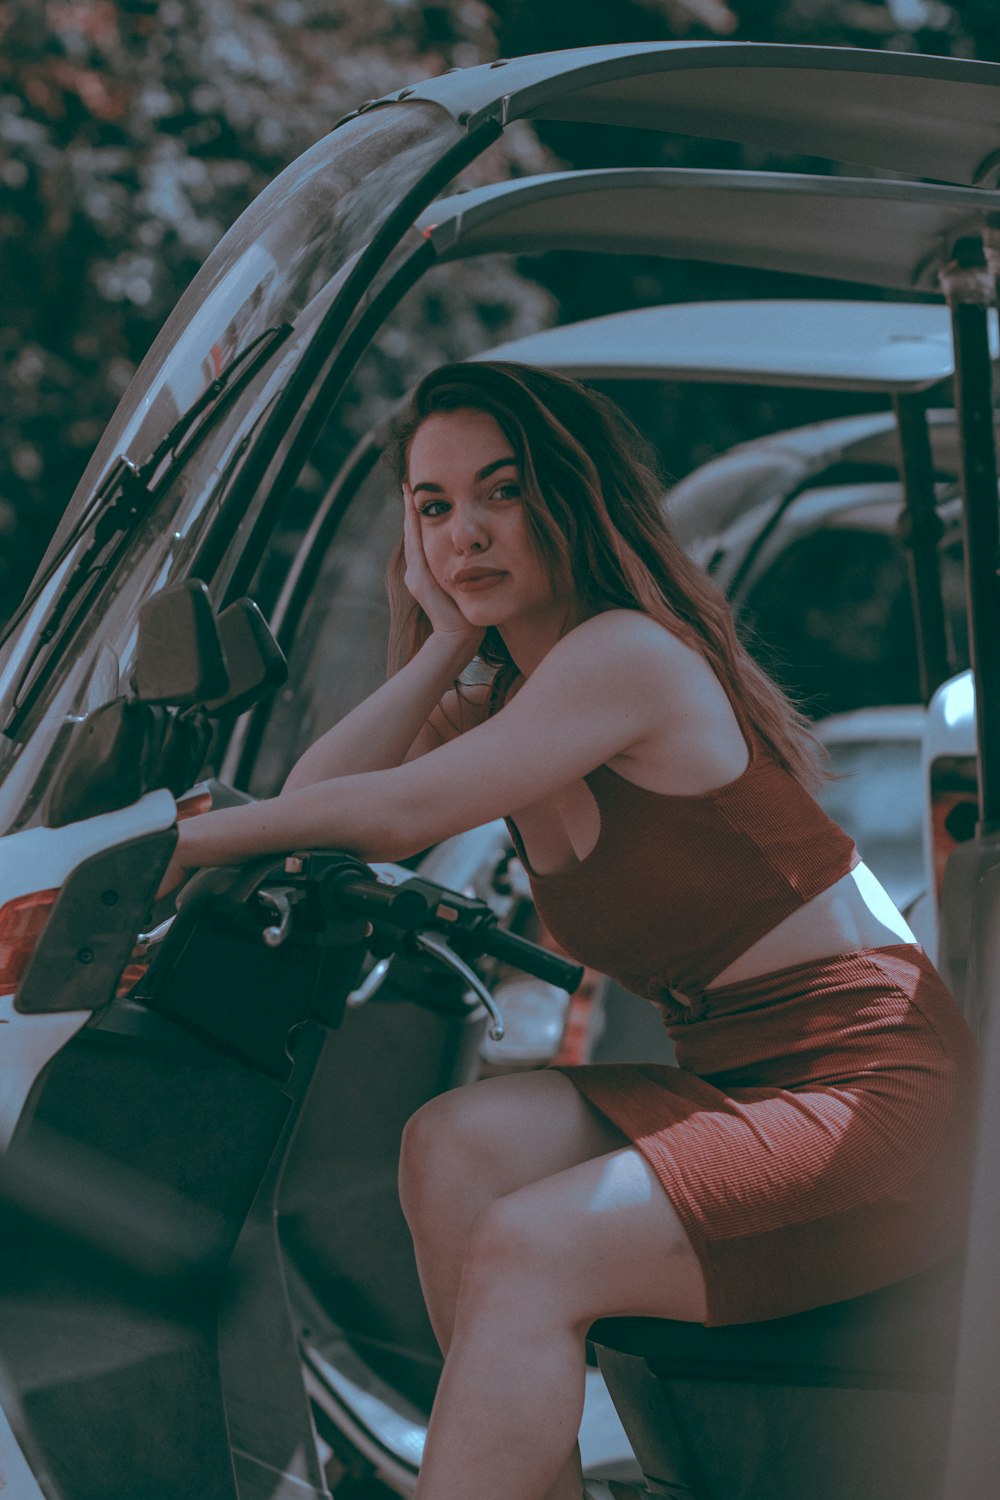 woman in red tank top and red shorts sitting on black car